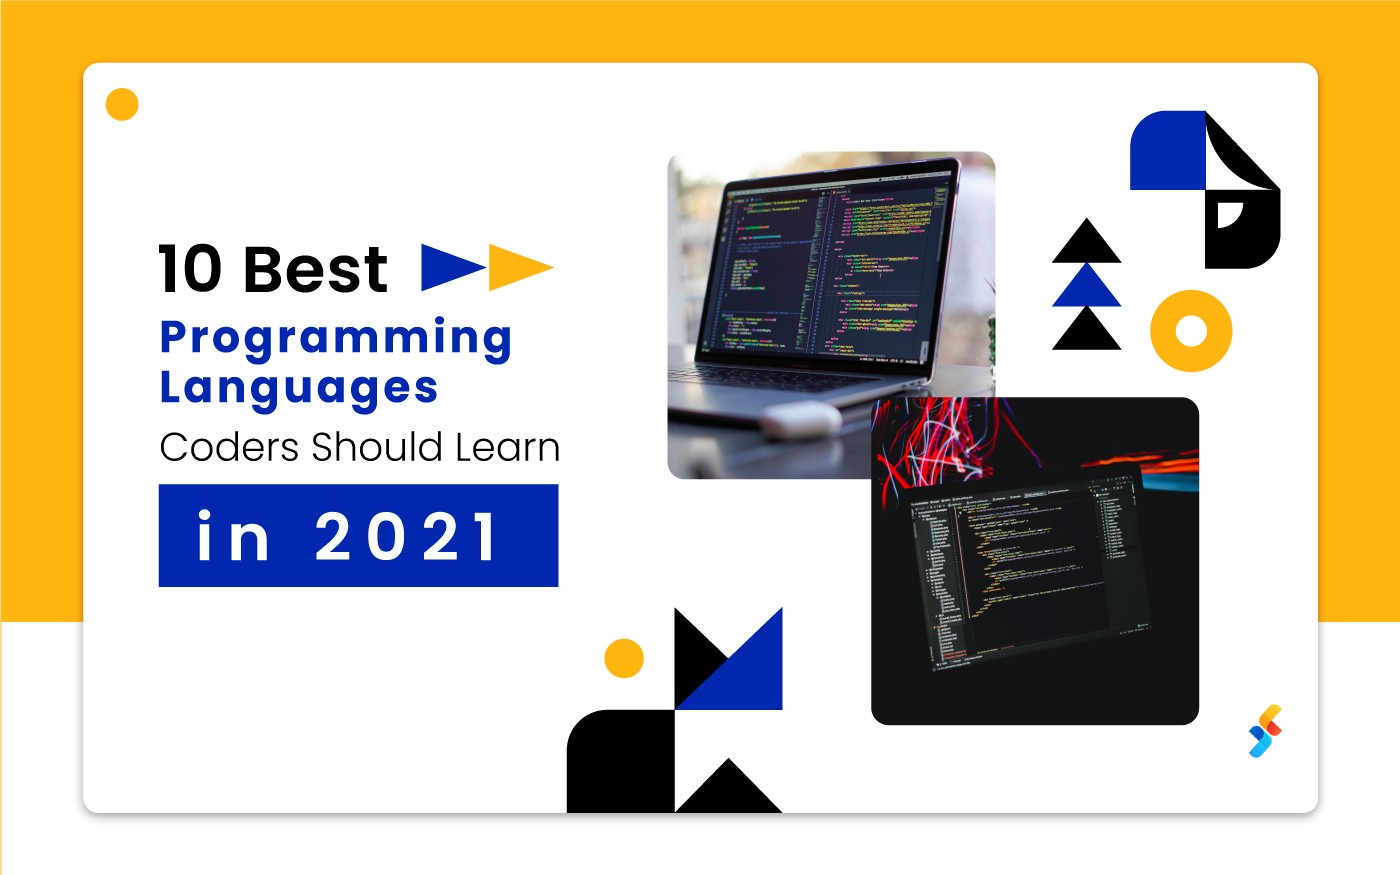 10 Best Programming Languages Coders Should Learn in 2021